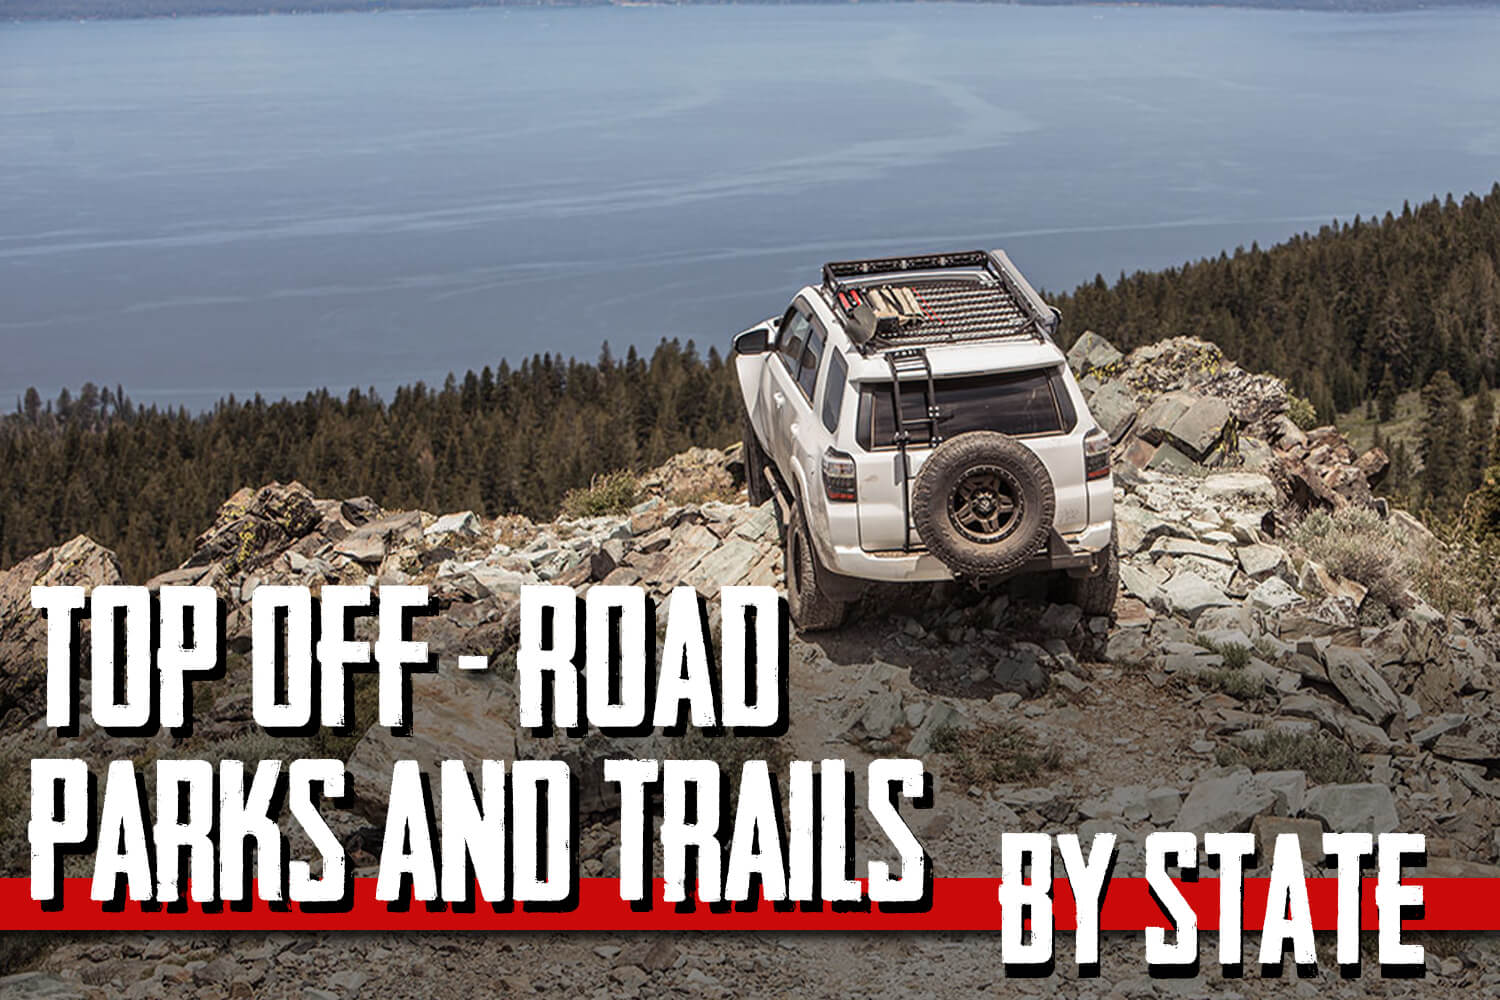 Top Off-Road Parks and Trails by State